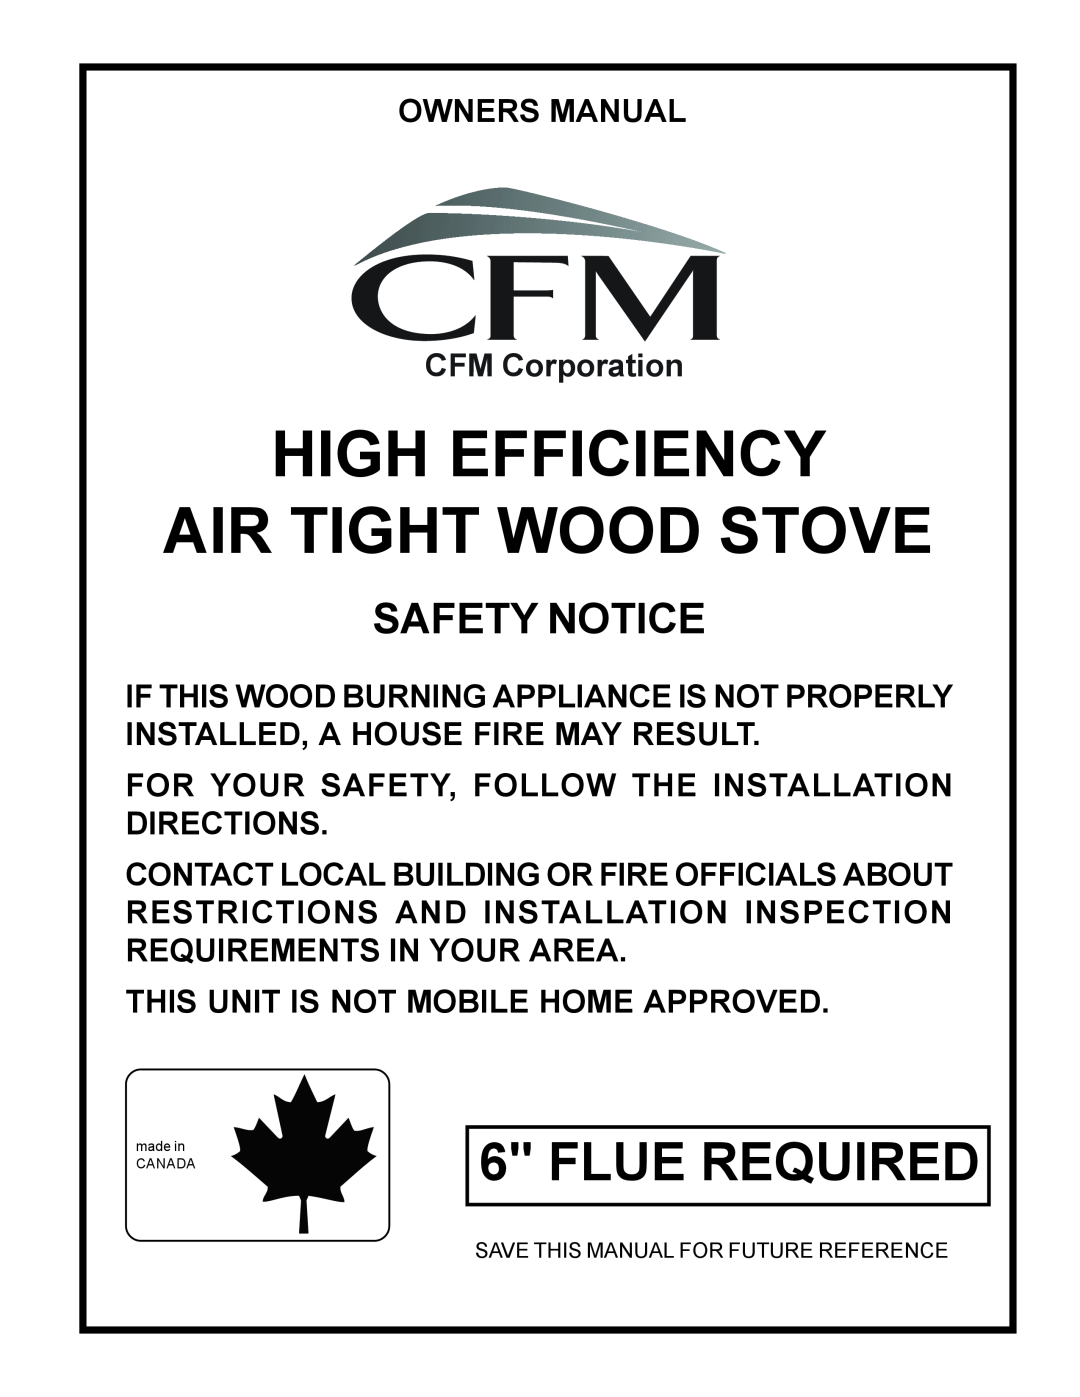 Vermont Casting WOOD STOVE owner manual High Efficiency Air Tight Wood Stove, Flue Required, Safety Notice 